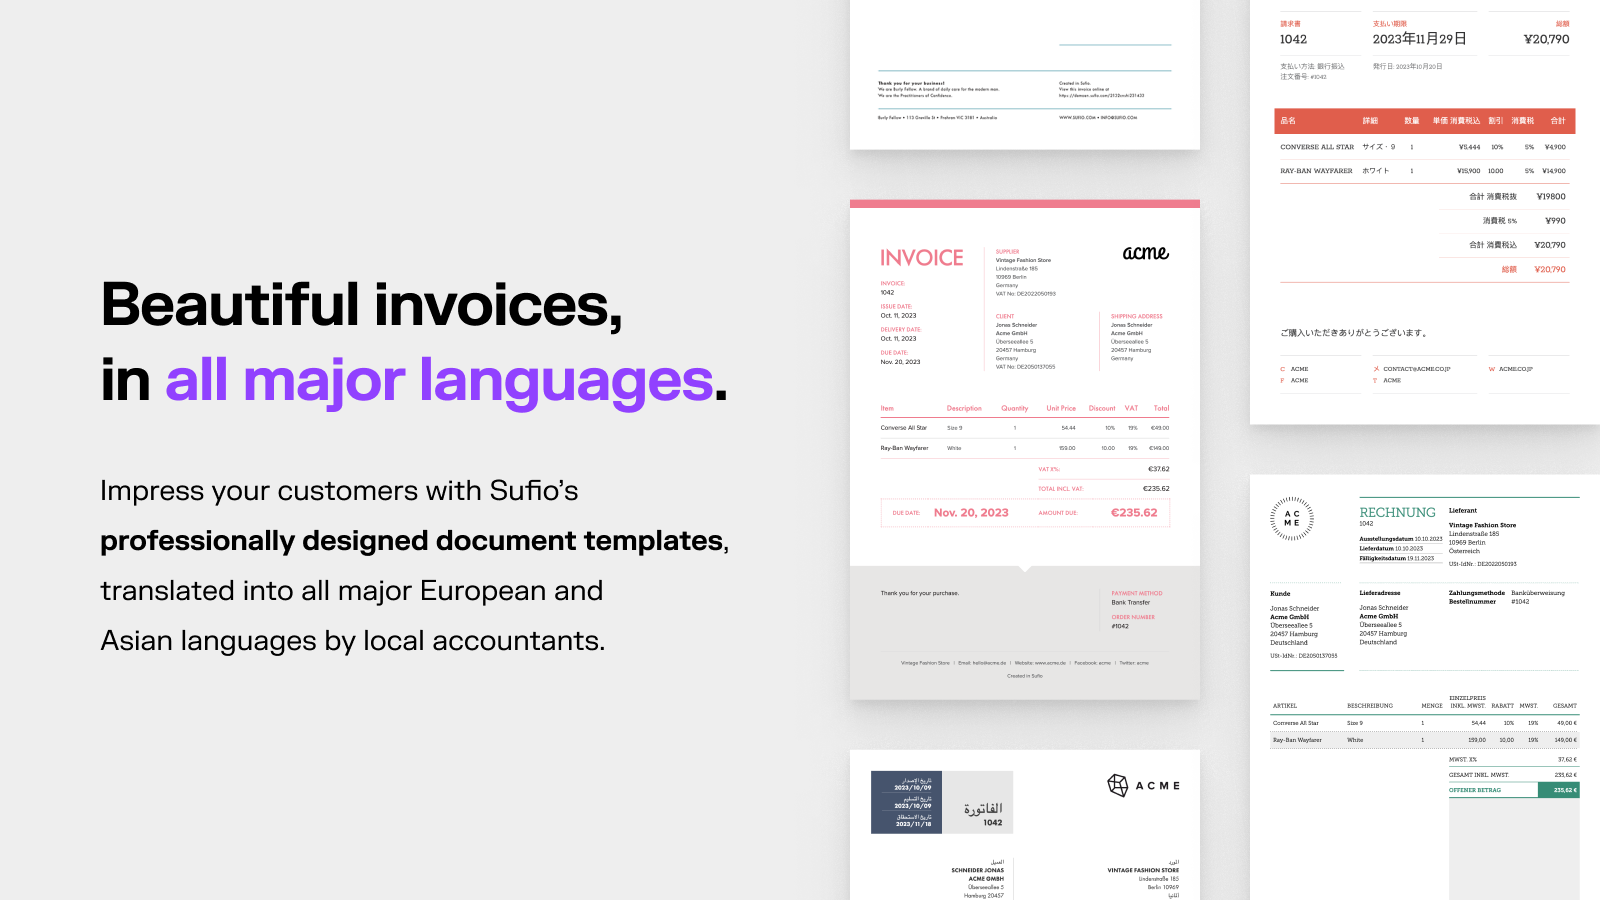 Beautiful invoices. Now in 35 languages.